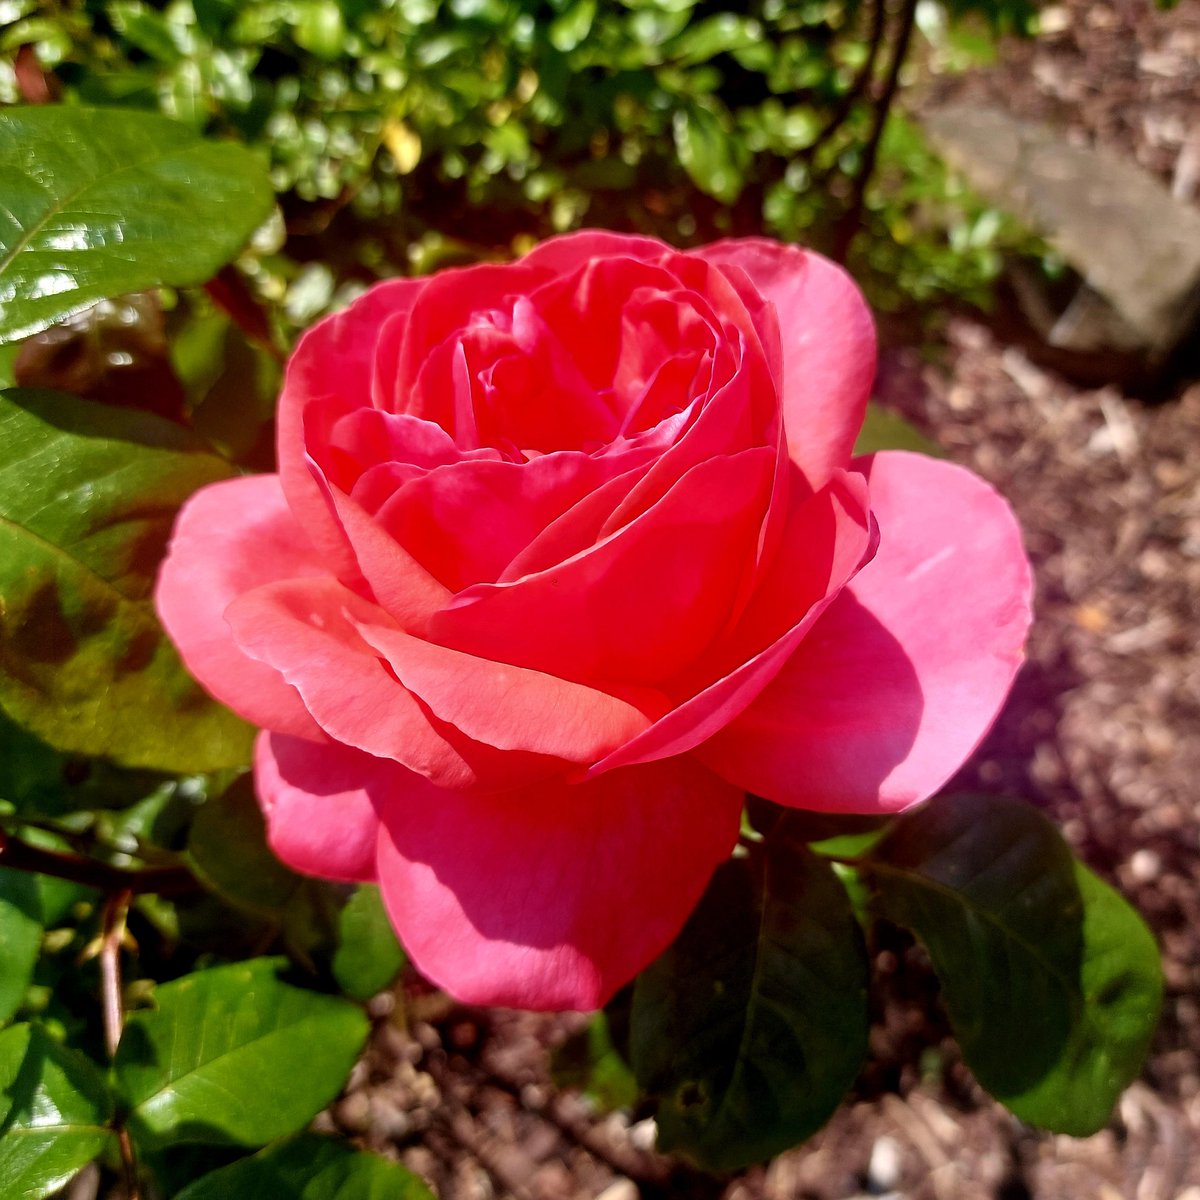 Our beautiful rose loved the rain overnight & is in full bloom on this beautiful sunny day. Perfect for @PrideCymru this weekend and @SwanseaUni Open Day today! Do say hi if you are at Bay Campus. I will be representing @SwanseaUniLib and our Inclusive Services group.